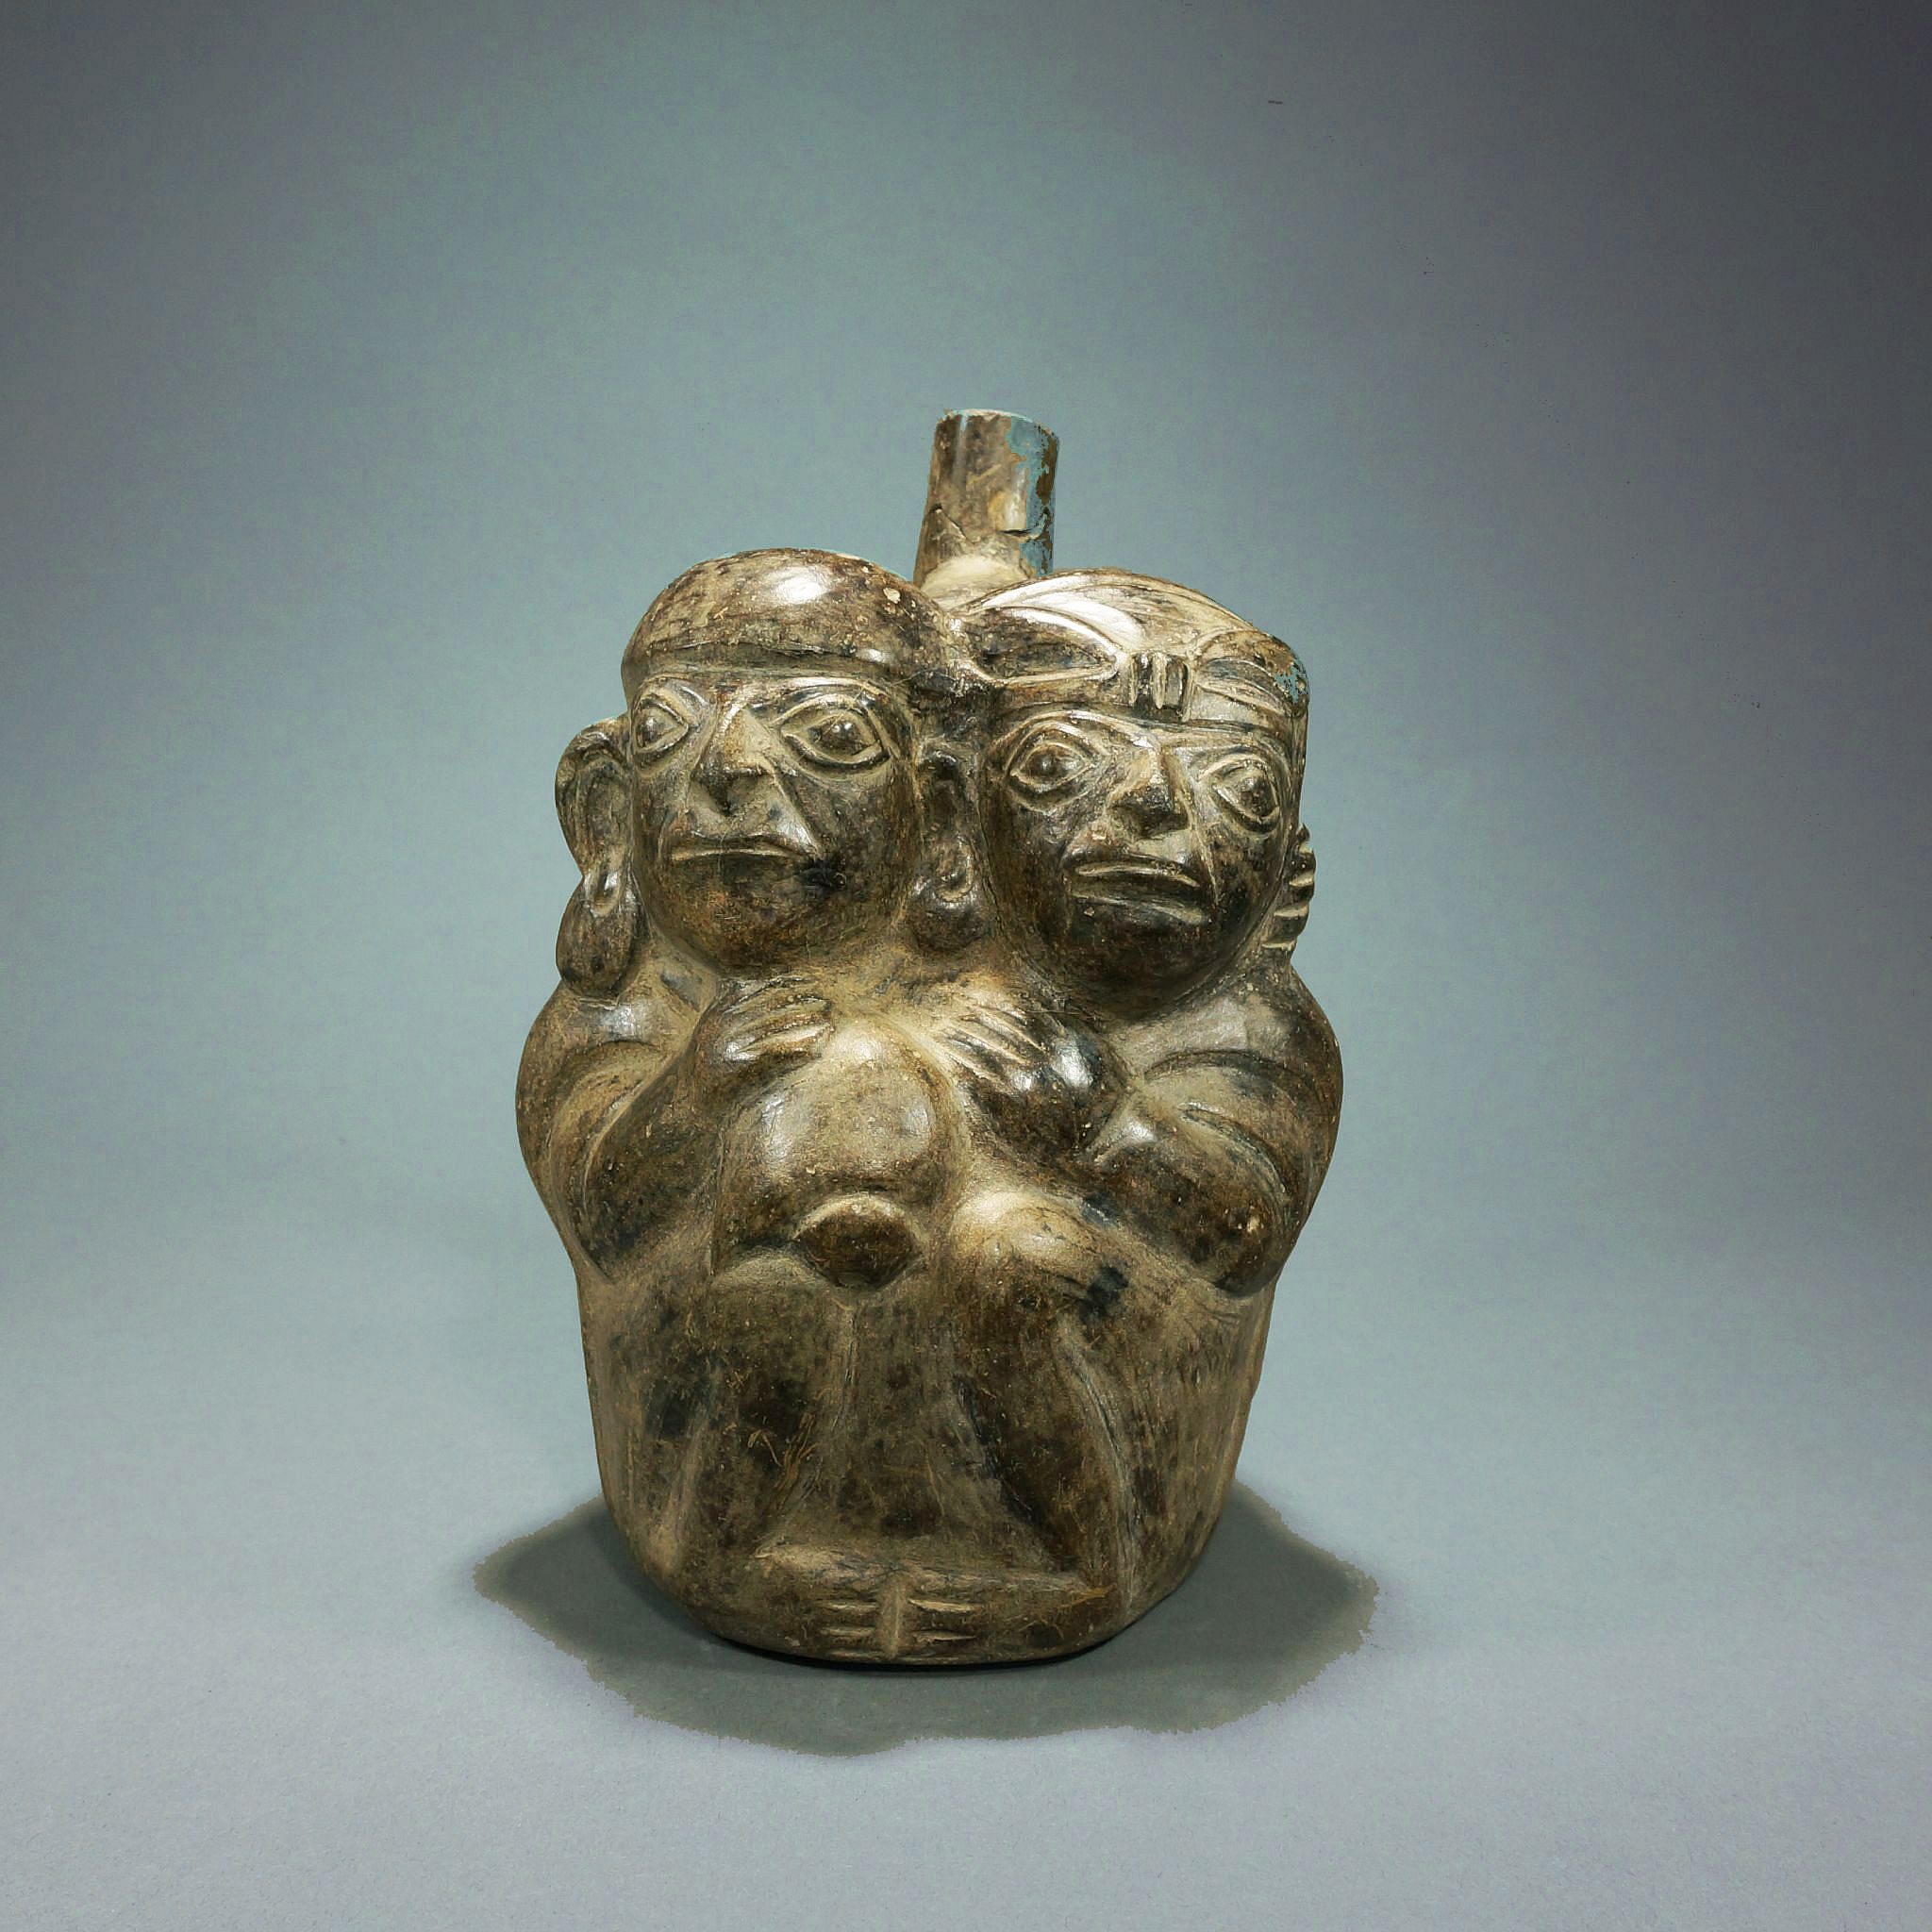 Peru, Moche II Grayware Vessel with Embracing Couple
An embracing couple is an extremely rare subject for Andean art from any culture.  Although ancient Andean art features many human characters such as hunters and shamans, as well as semi-human deities with a wide range themes and emotions, romantic couples are not a common theme.  In this sculptural depiction of a Moche couple, the male wears large ear ornaments, and holds a conch trumpet, and the female wears a feather plume in her hair, all signs of wealth and status.
Media: Ceramic
Dimensions: Height 8"
Price Upon Request
M9015H